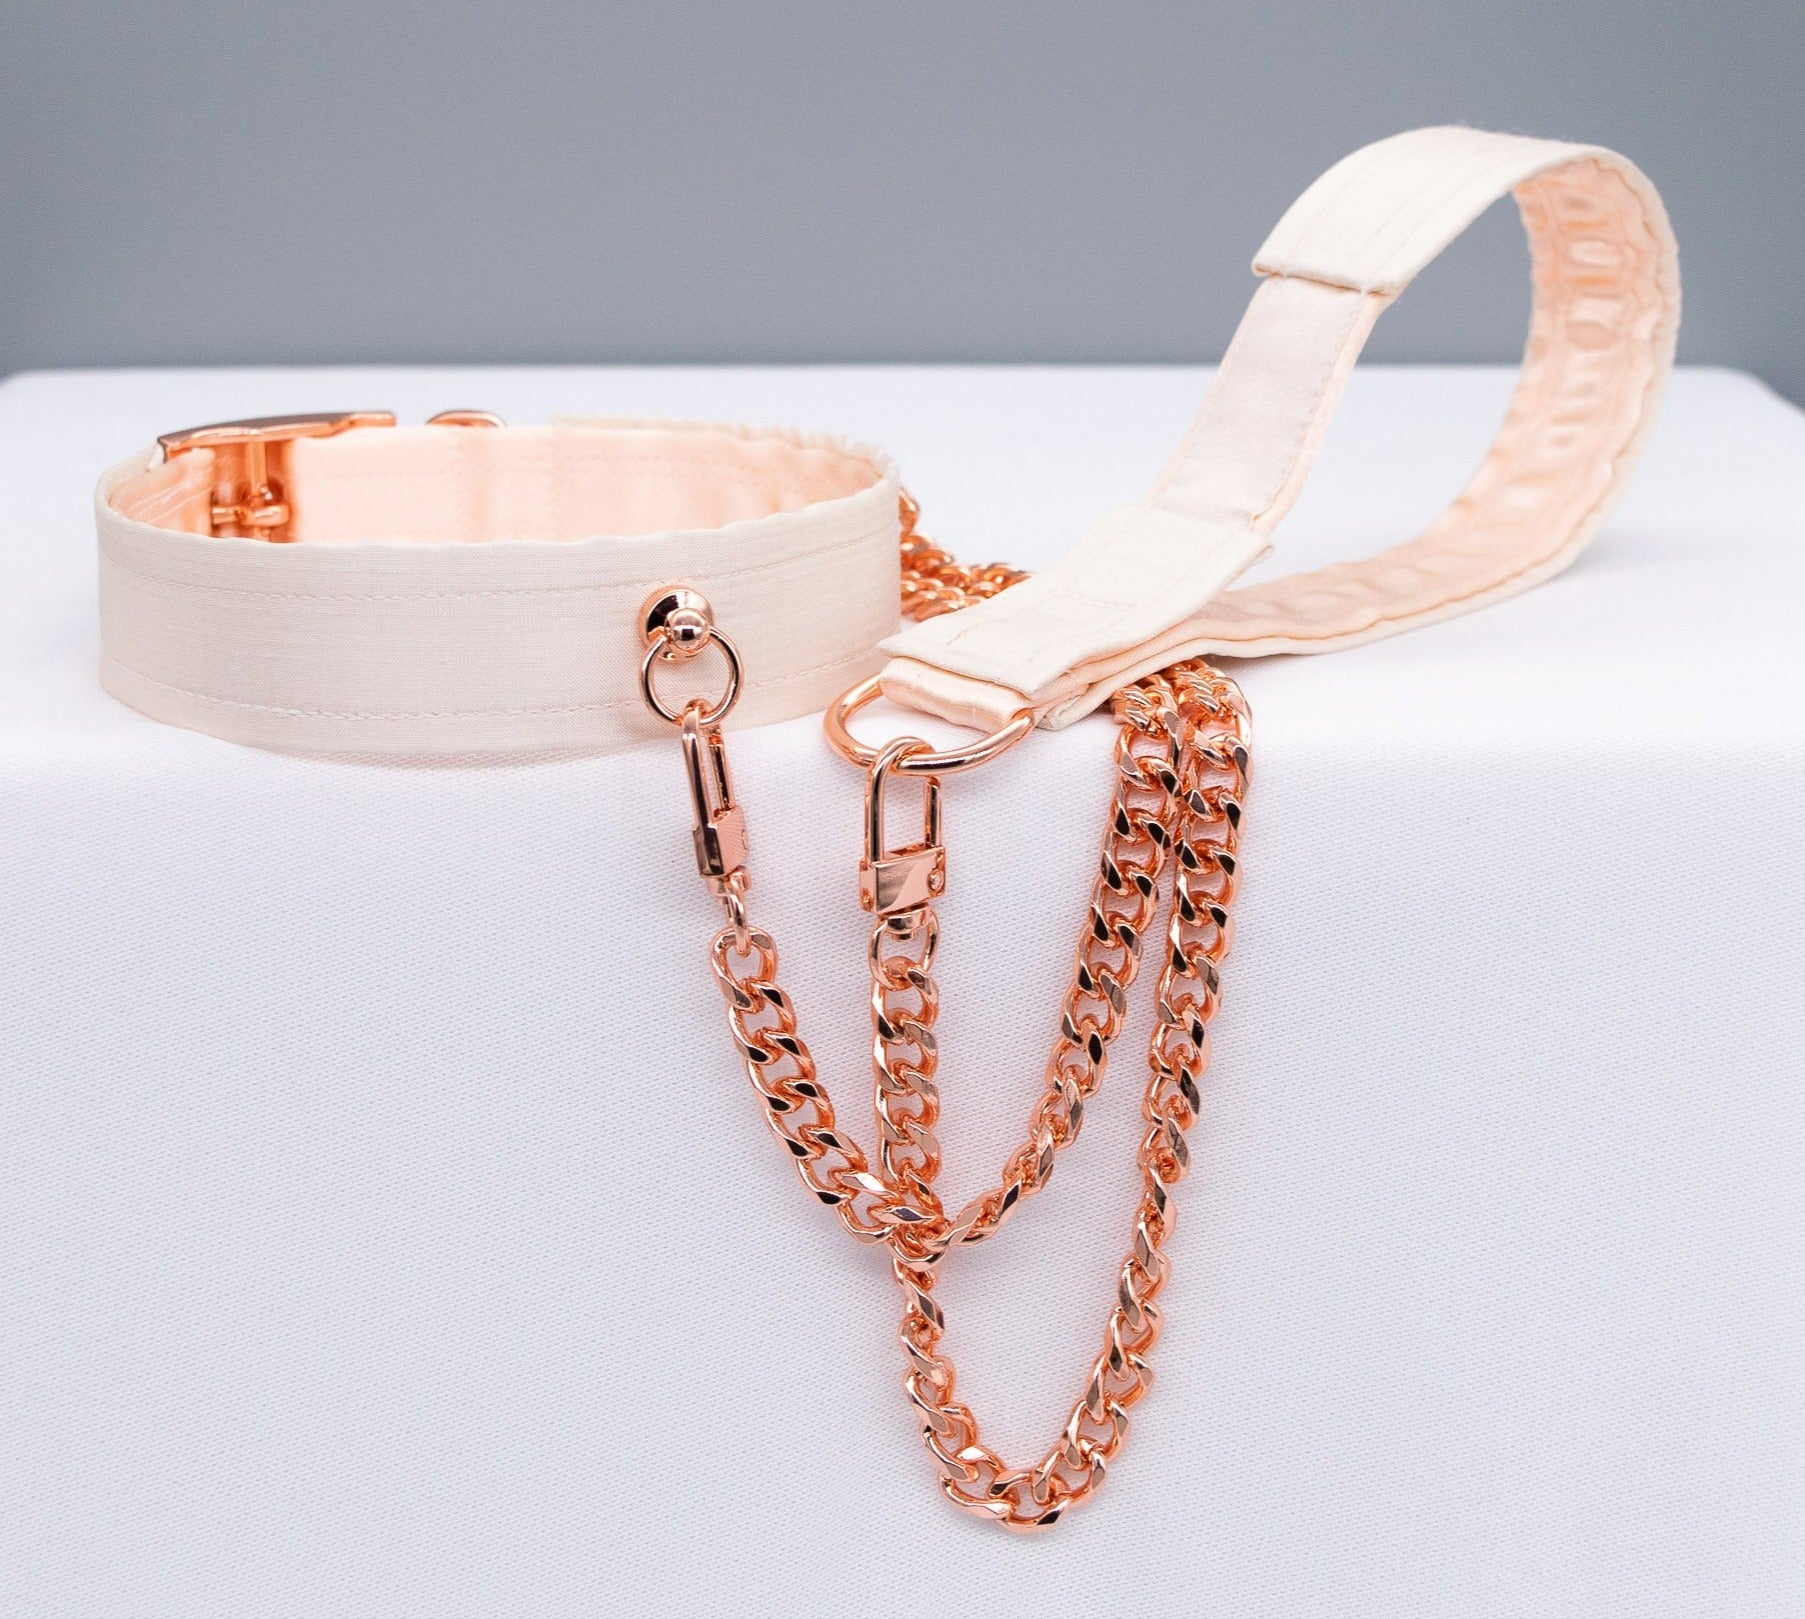 French Raw Silk - Luxury Rose Gold Collar and Leash Set